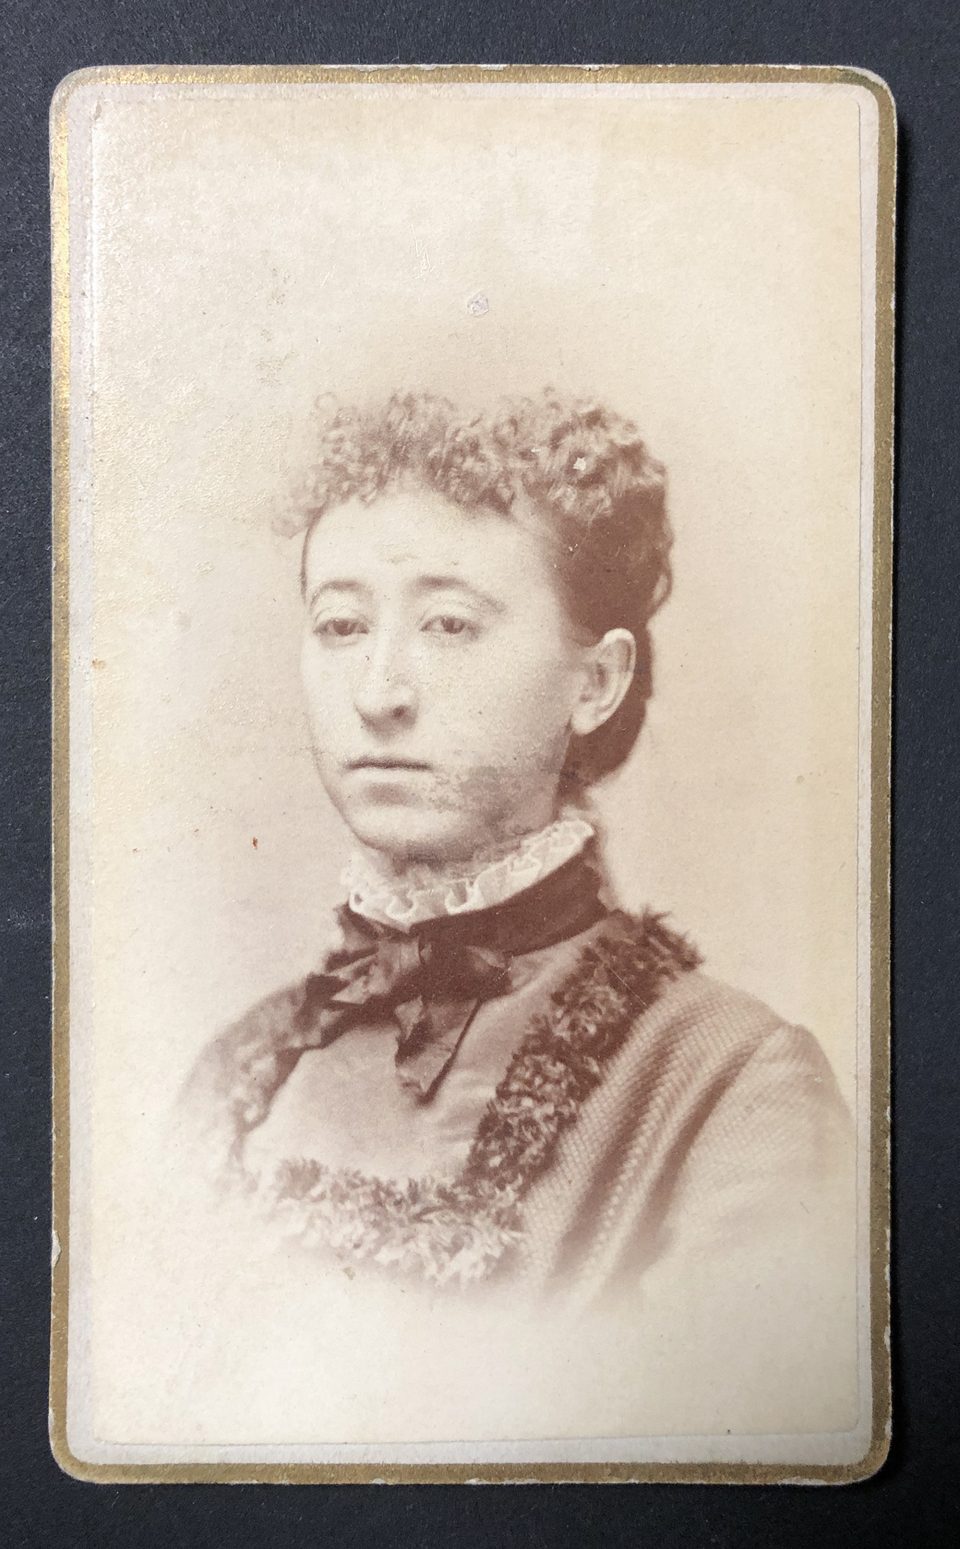 Head and shoulders portrait of a young woman made by photographer J.A. Brush. The edge of the card is lined with metallic gold.